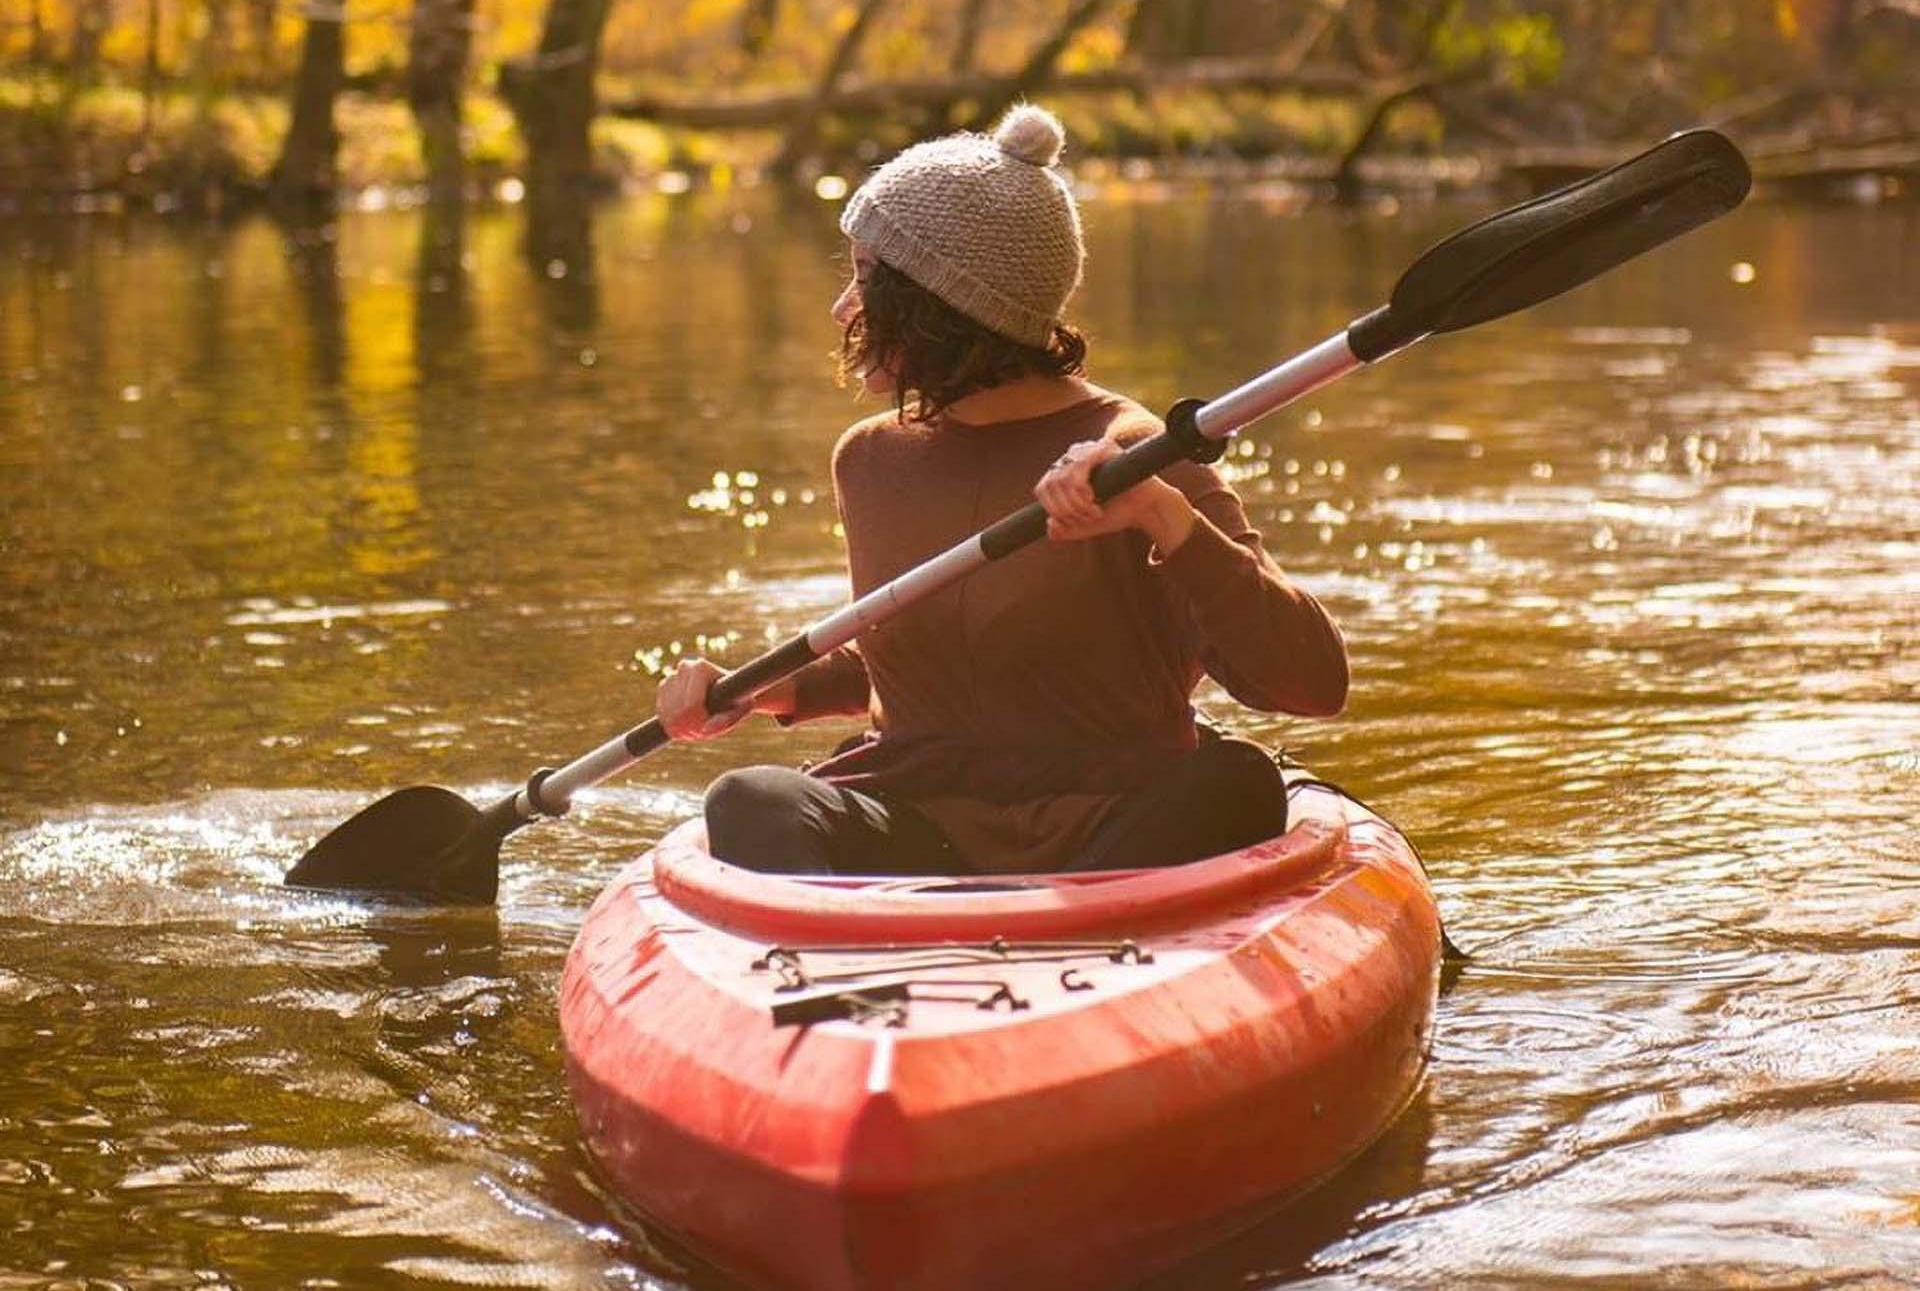 A person kayaking a river in the fall.